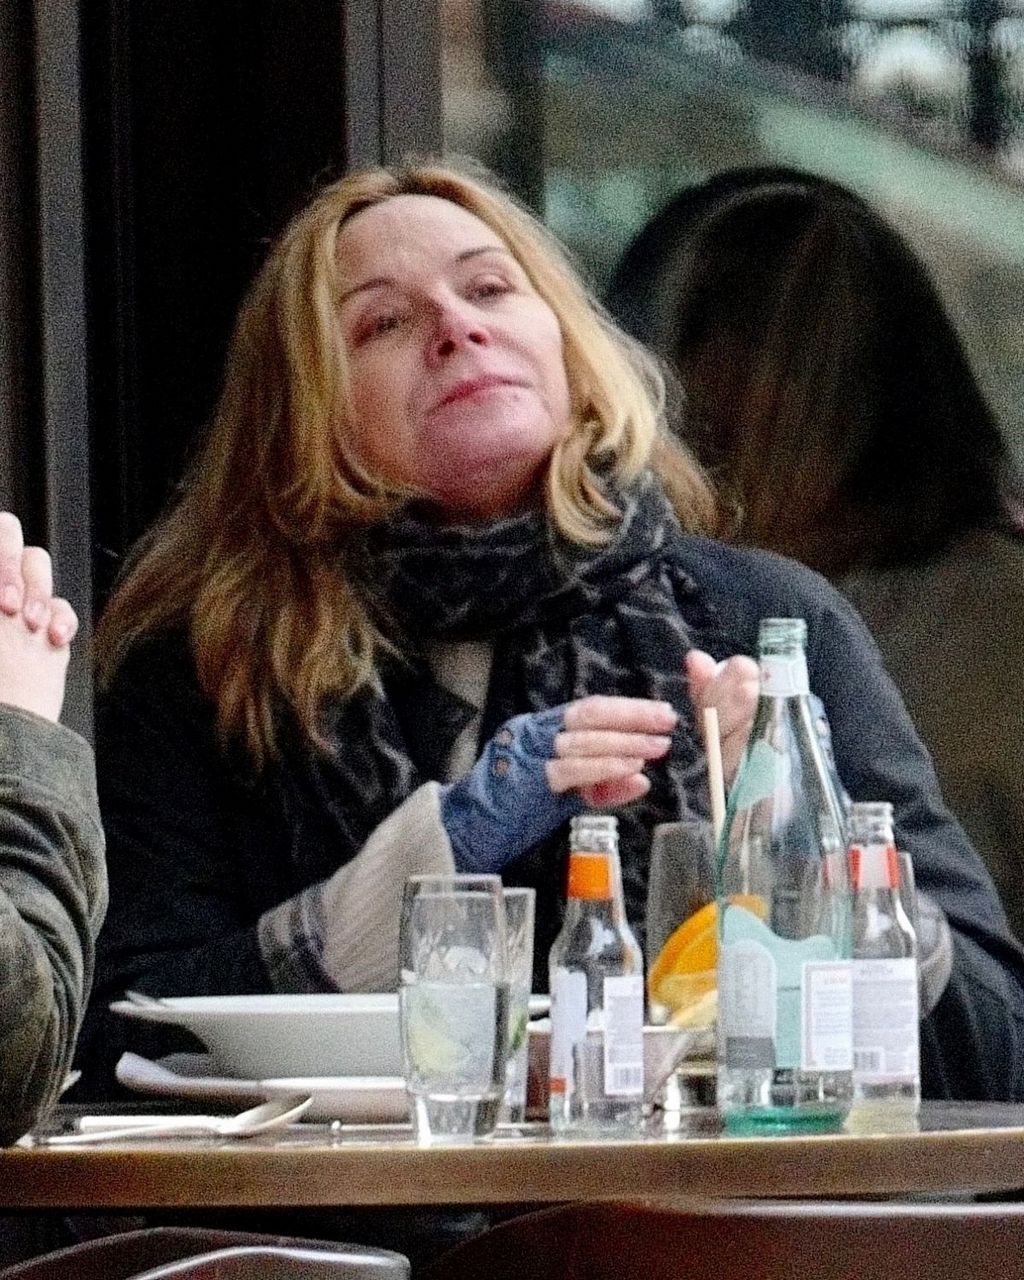 Kim Cattrall And Russell Thomas Out London